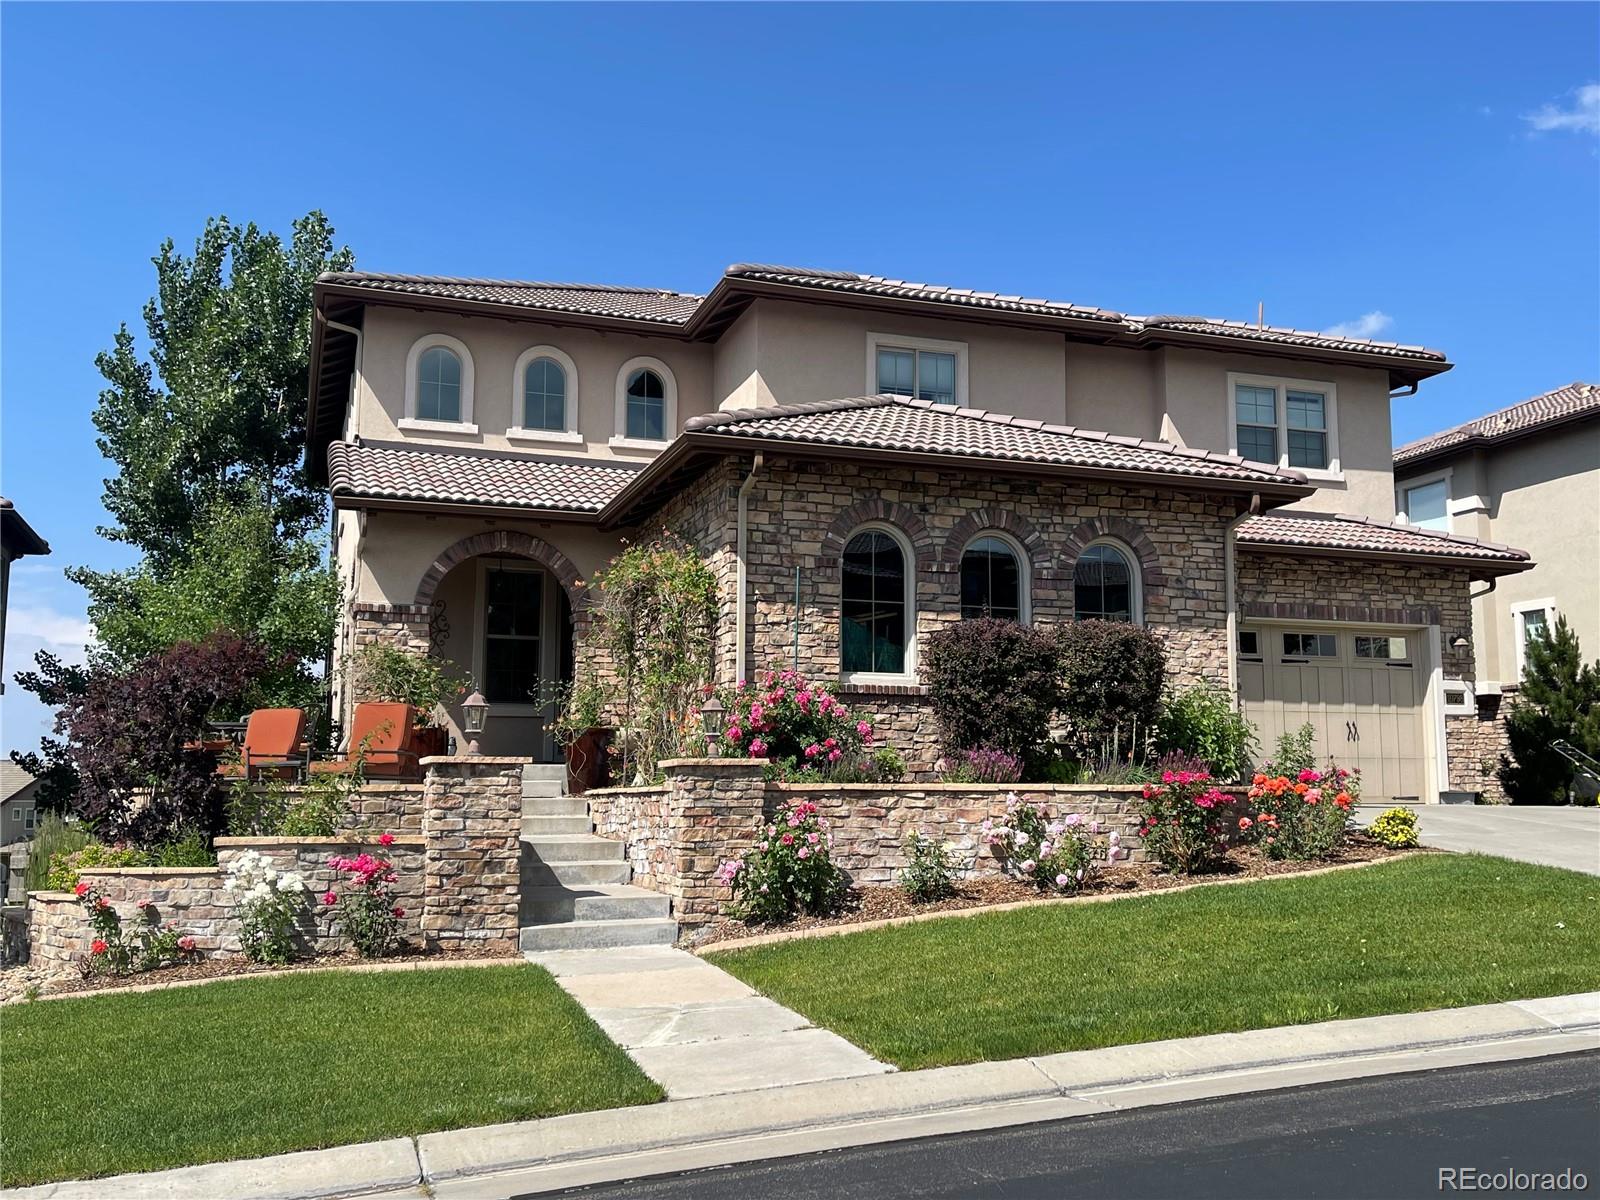 10798  Manorstone Drive, highlands ranch MLS: 4713588 Beds: 5 Baths: 5 Price: $1,550,000